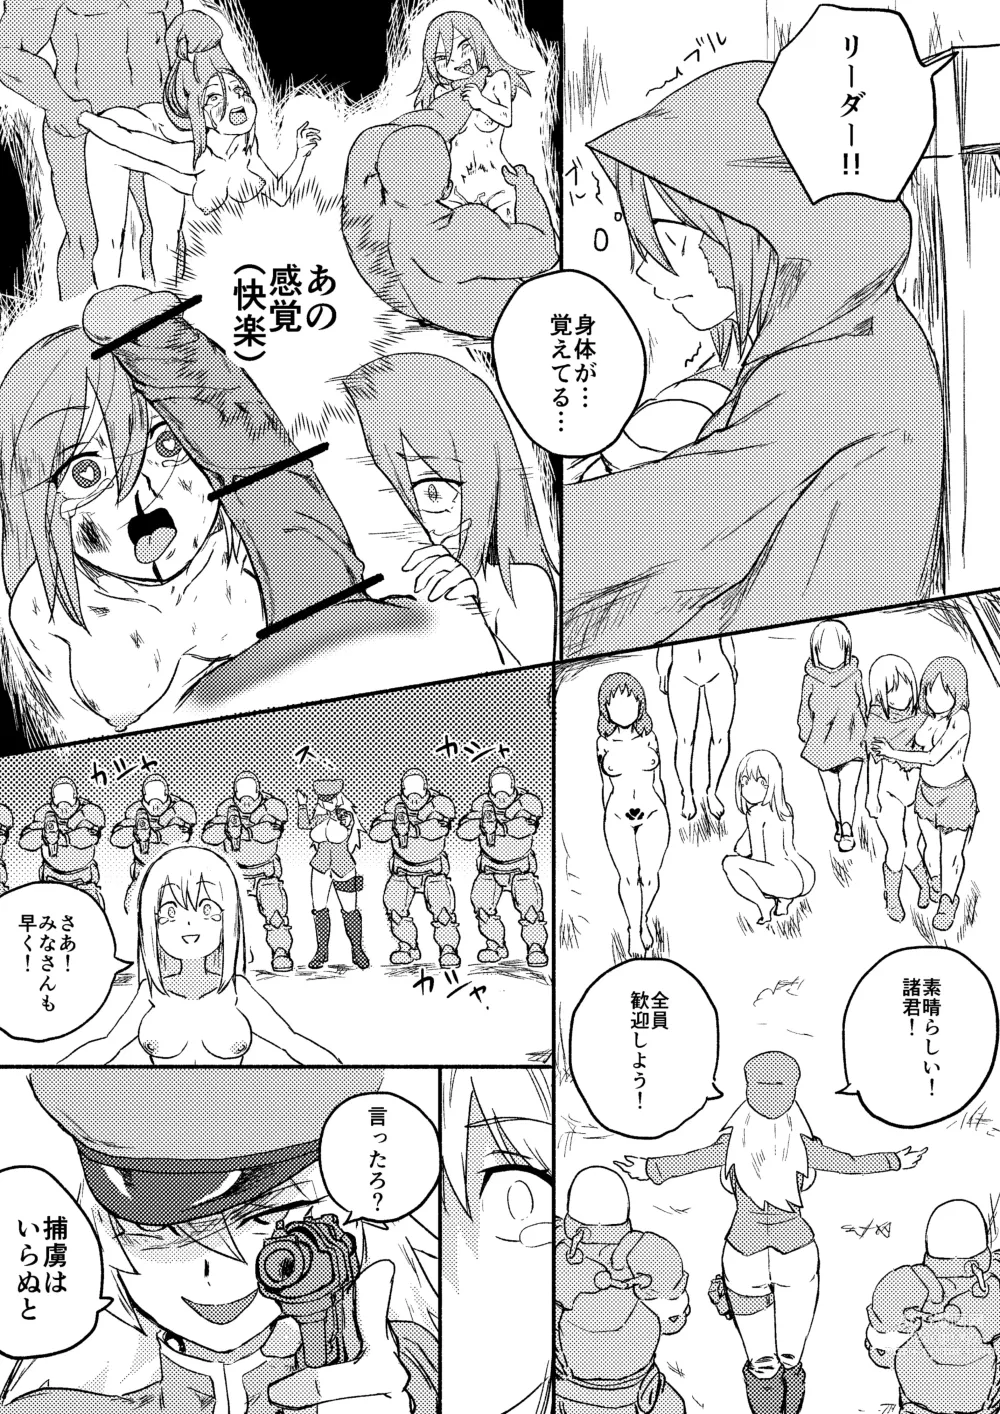 Page 4 of doujinshi Red Tag Episode 7 Part 2